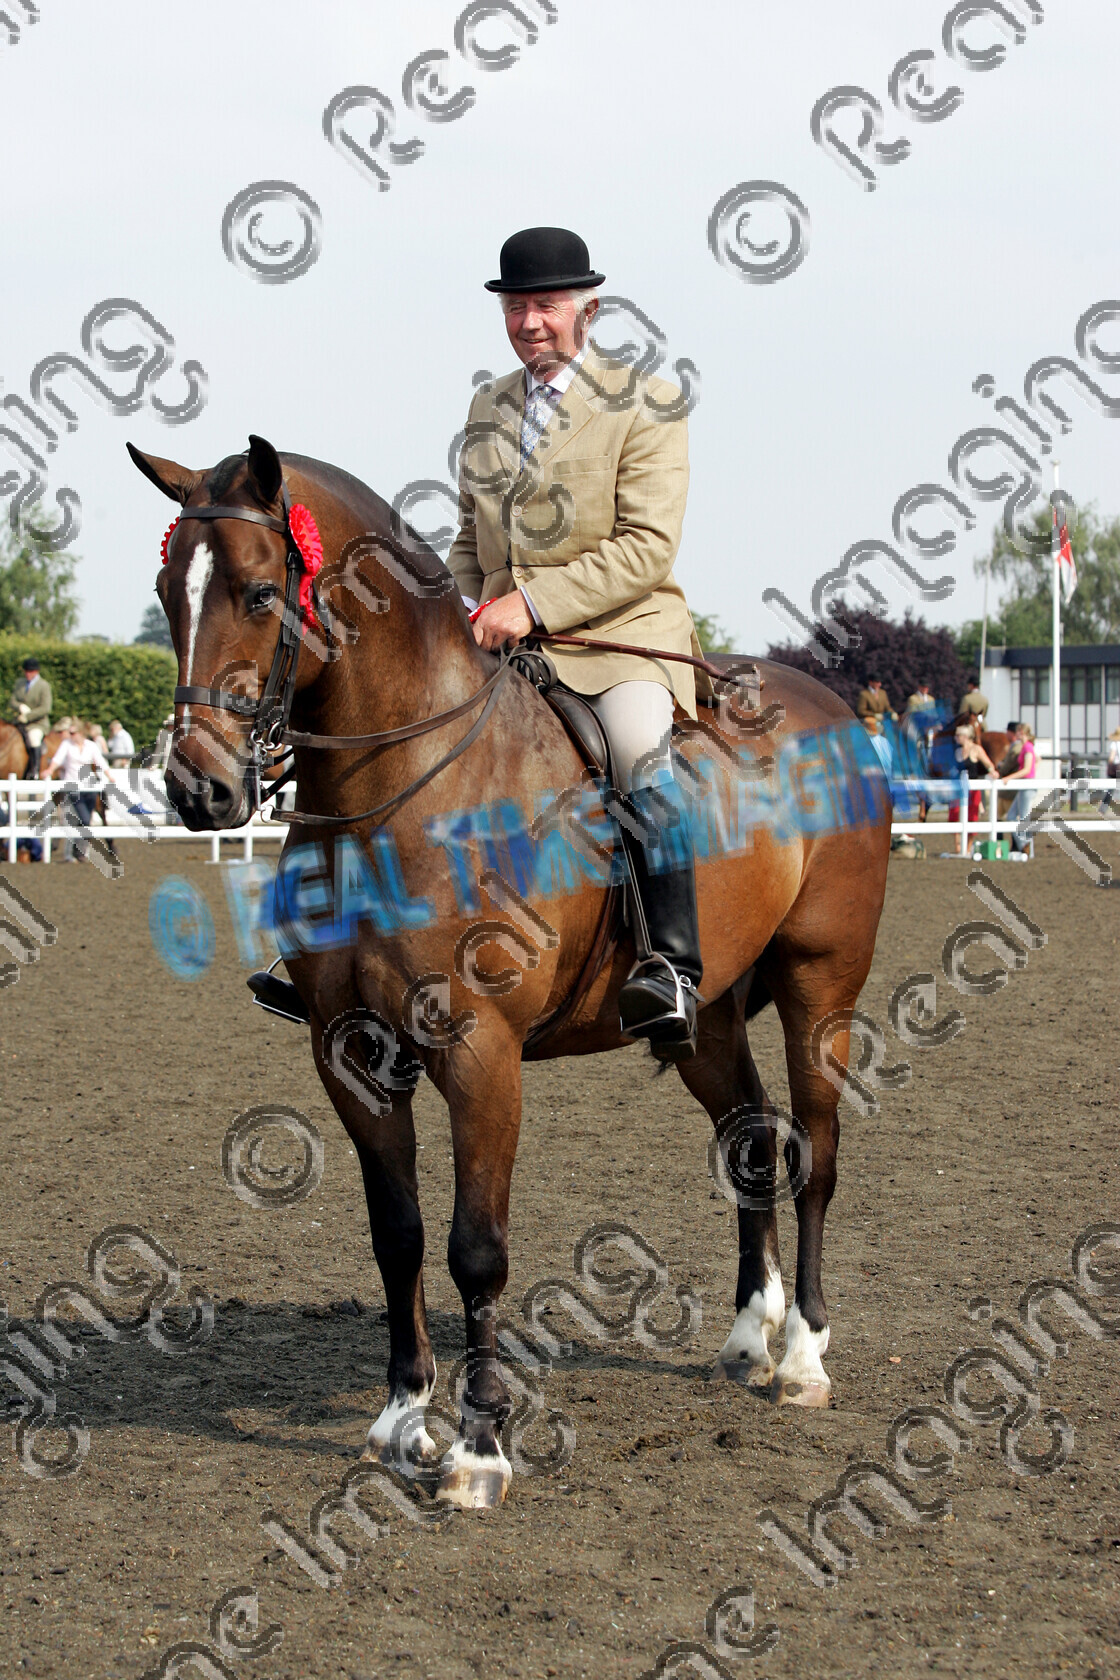 S06-32-8-129 copy 
 Keywords: The Royal Show rosette rosettes prize winner horse pony show showing Tuesday 4 July 2006 standing stood presentation championship champion ridden mounted 402 The Duke ridden by Robert Oliver,
Mrs S Cuddy Lightweight Riding Cob bay gelding